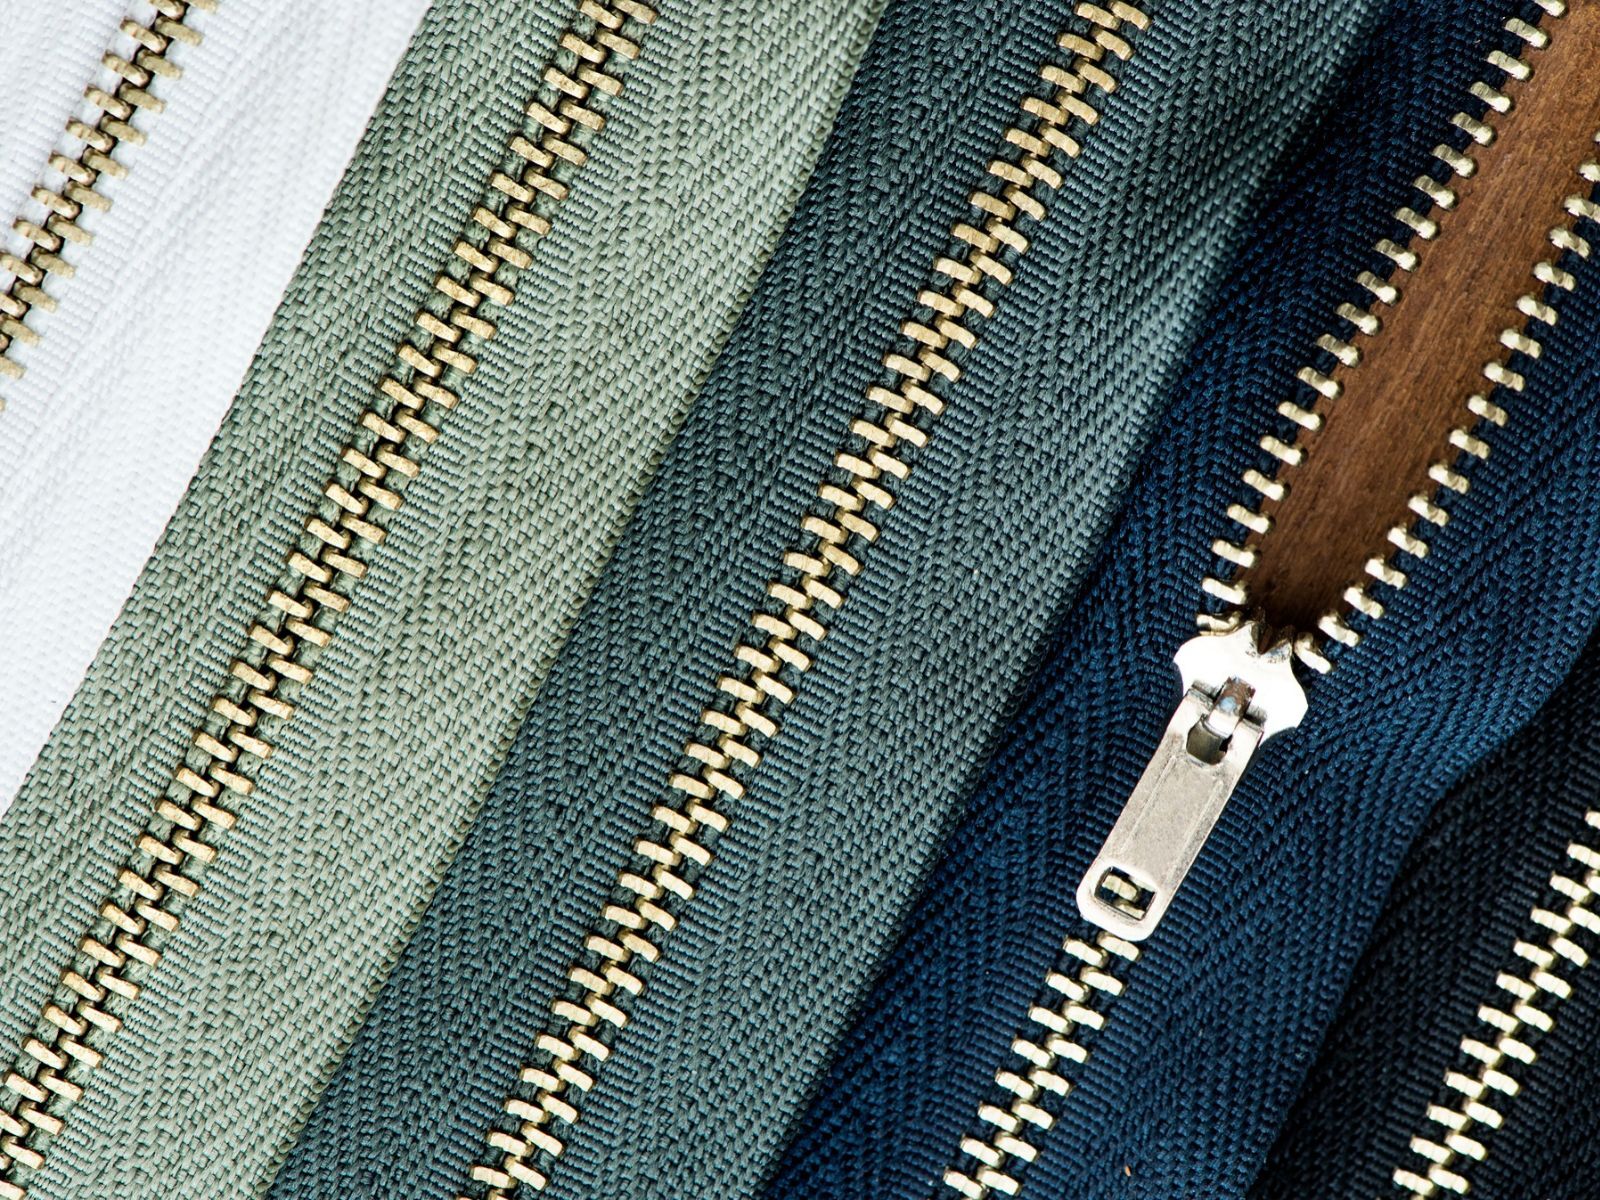 How to fix a separated zipper